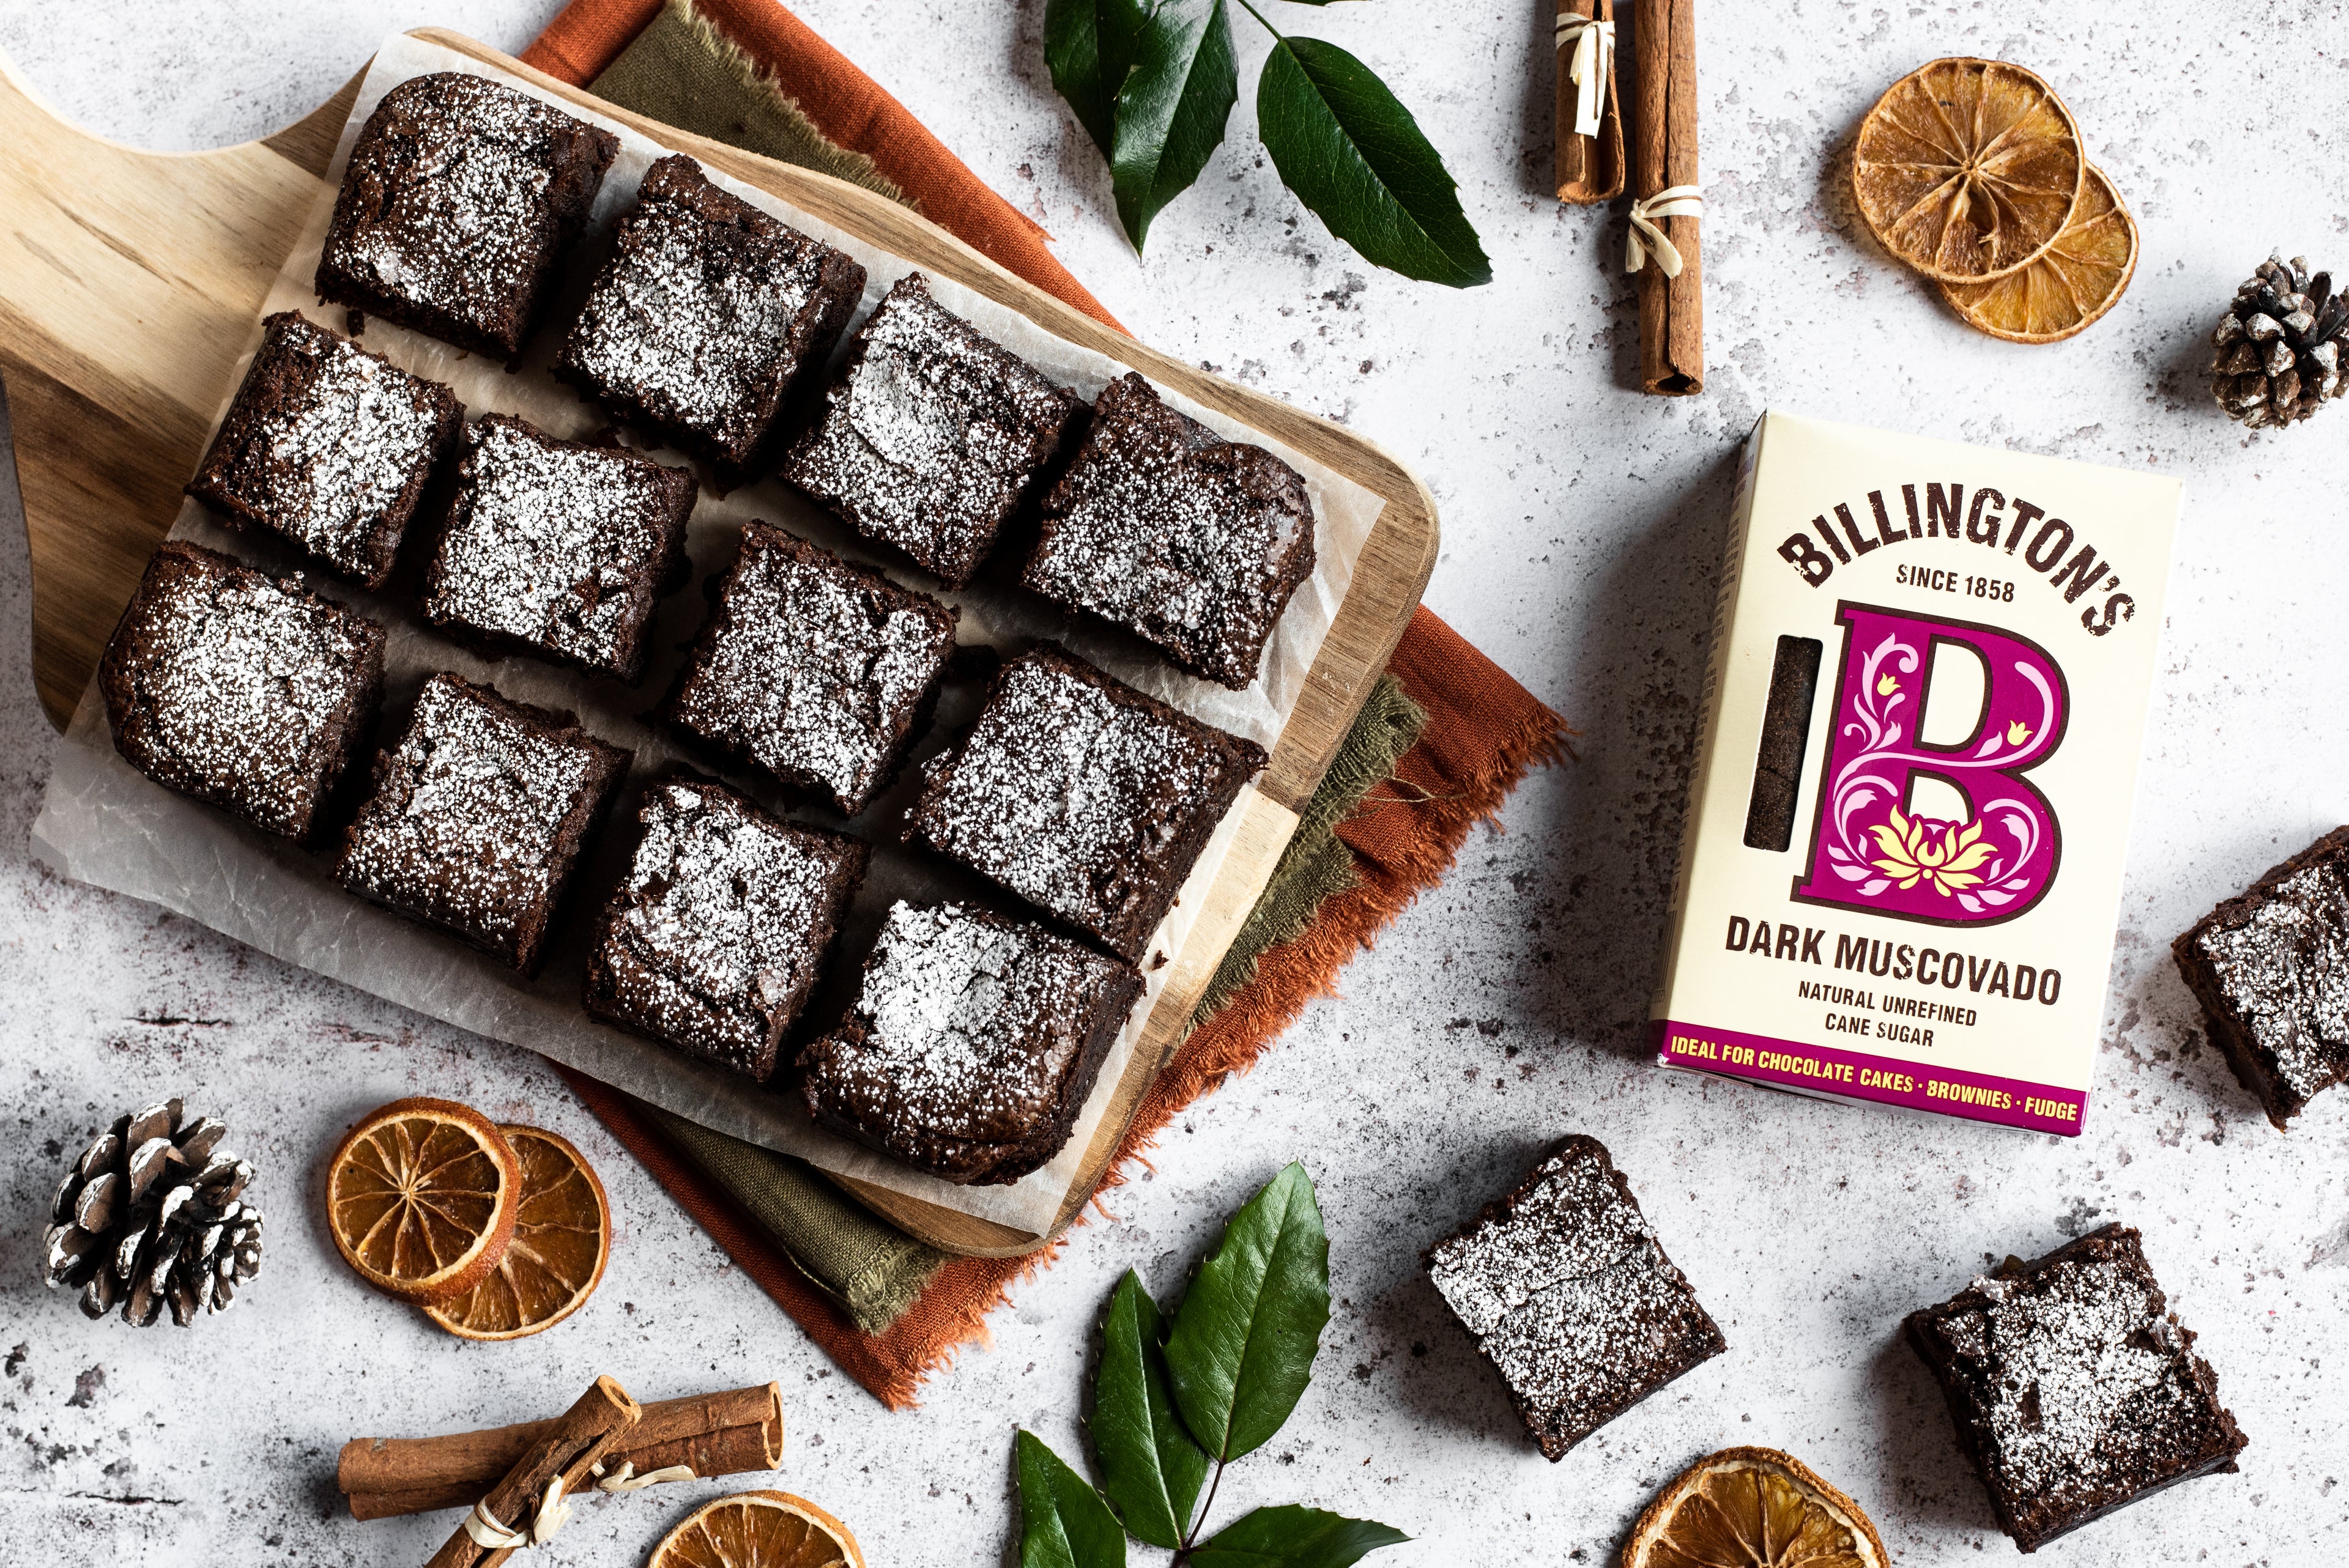 12 chocolate brownies on a wooden board next to a packet of Billington's dark muscovado sugar